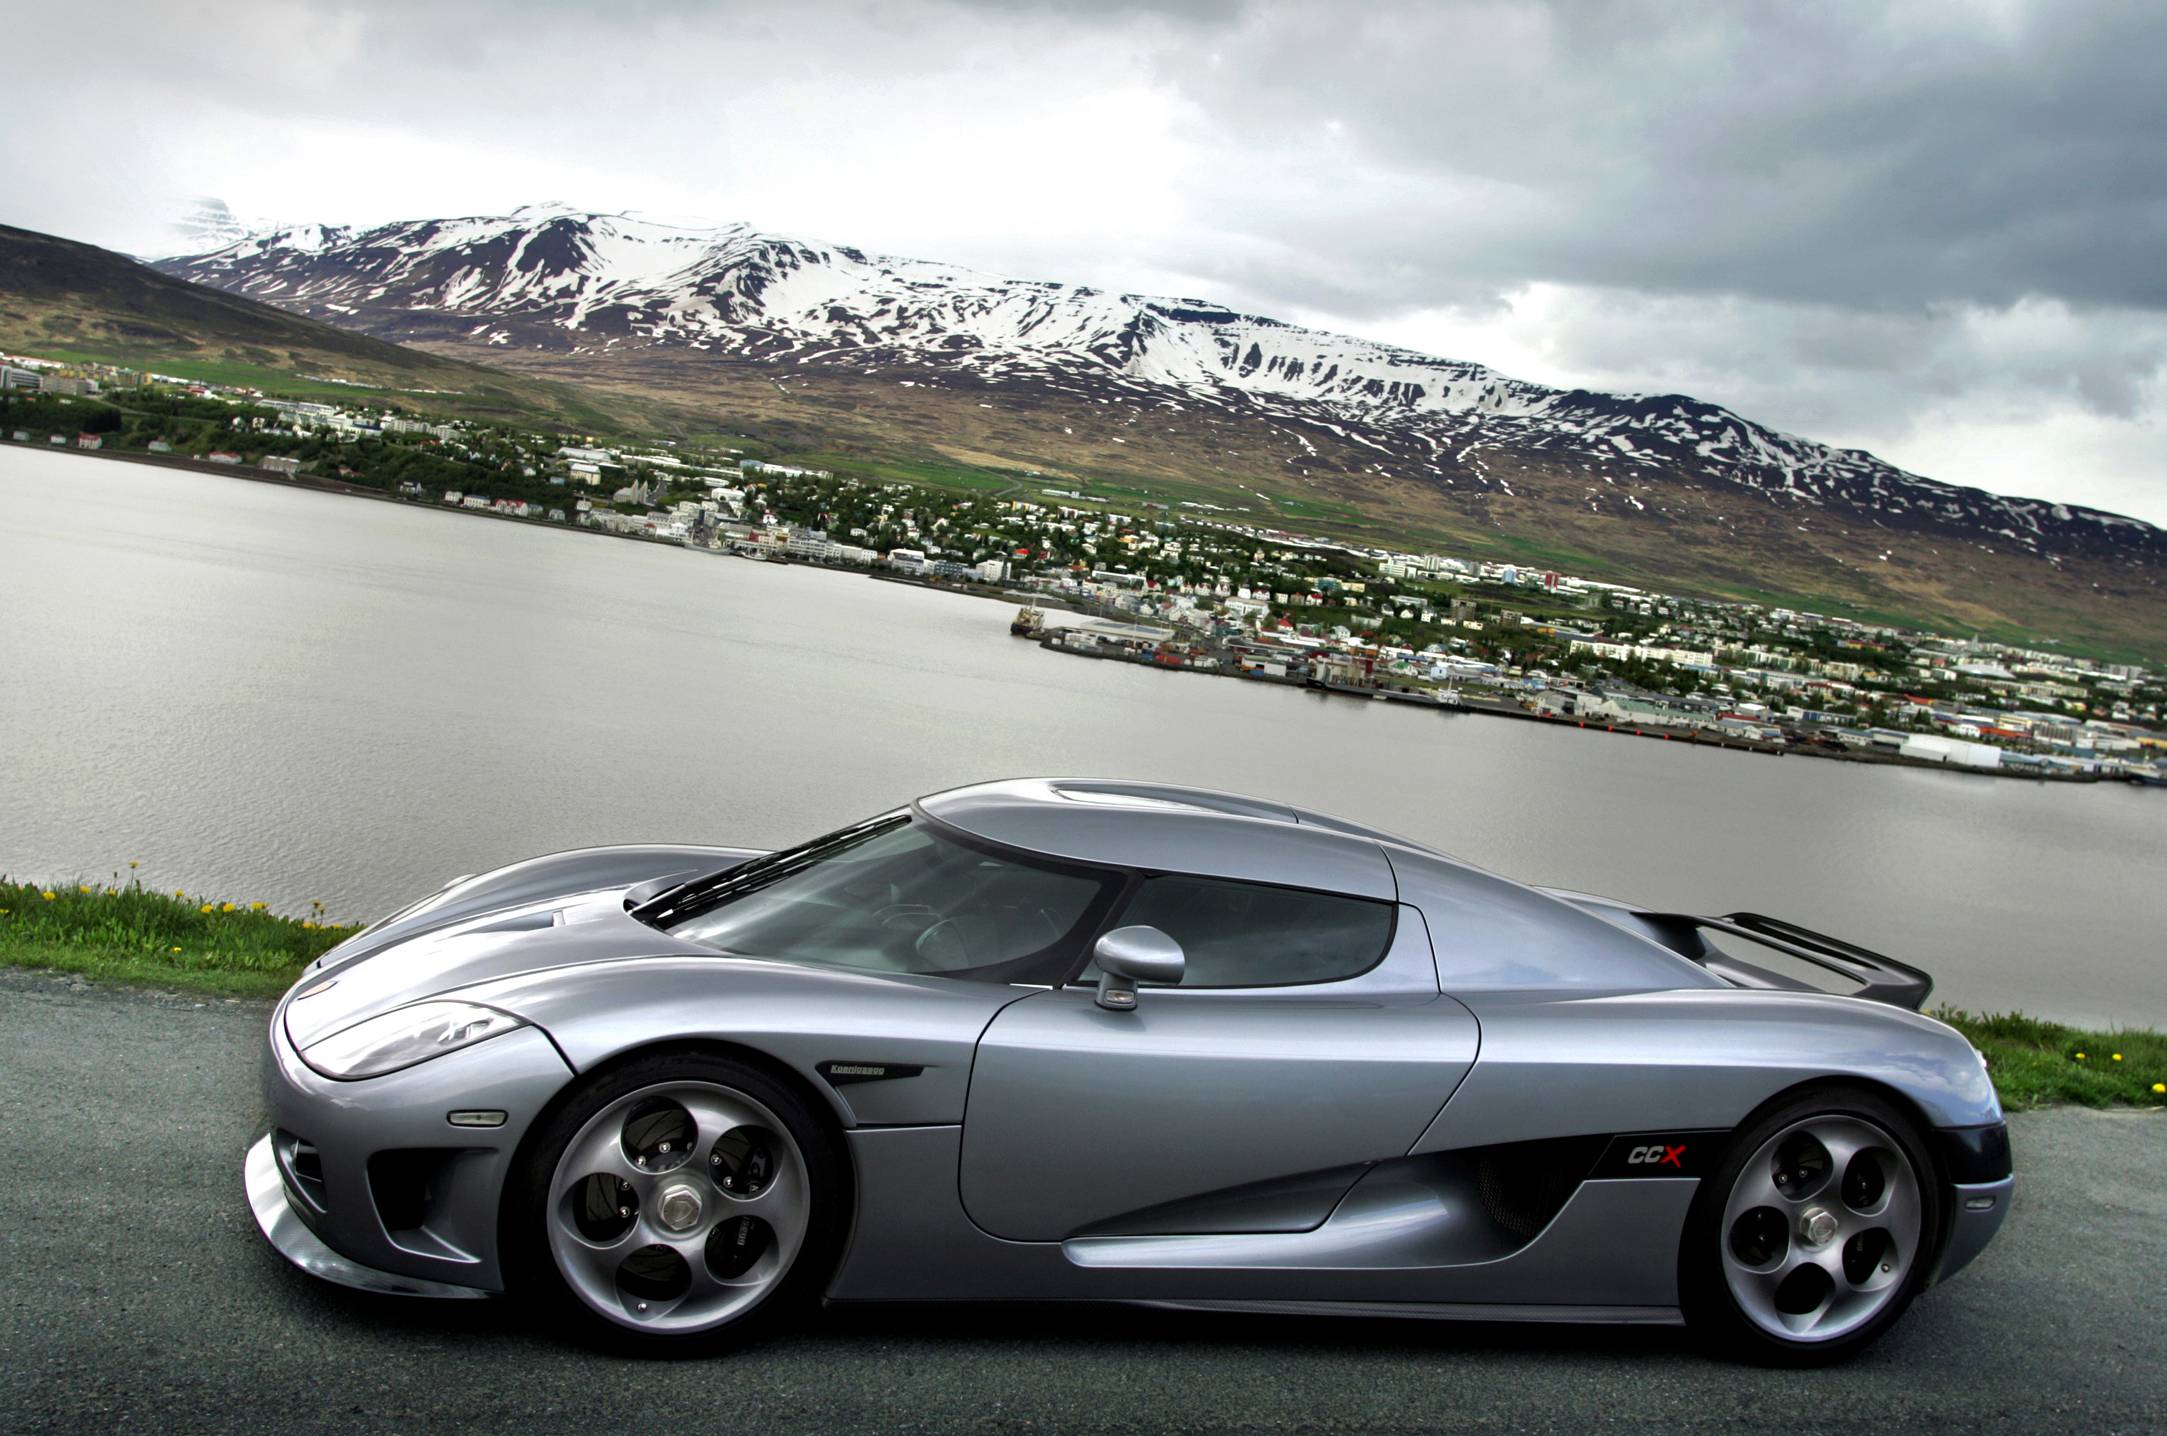 Koenigsegg CCX Wallpaper For iPhone Free 17065. Best Cars Picture